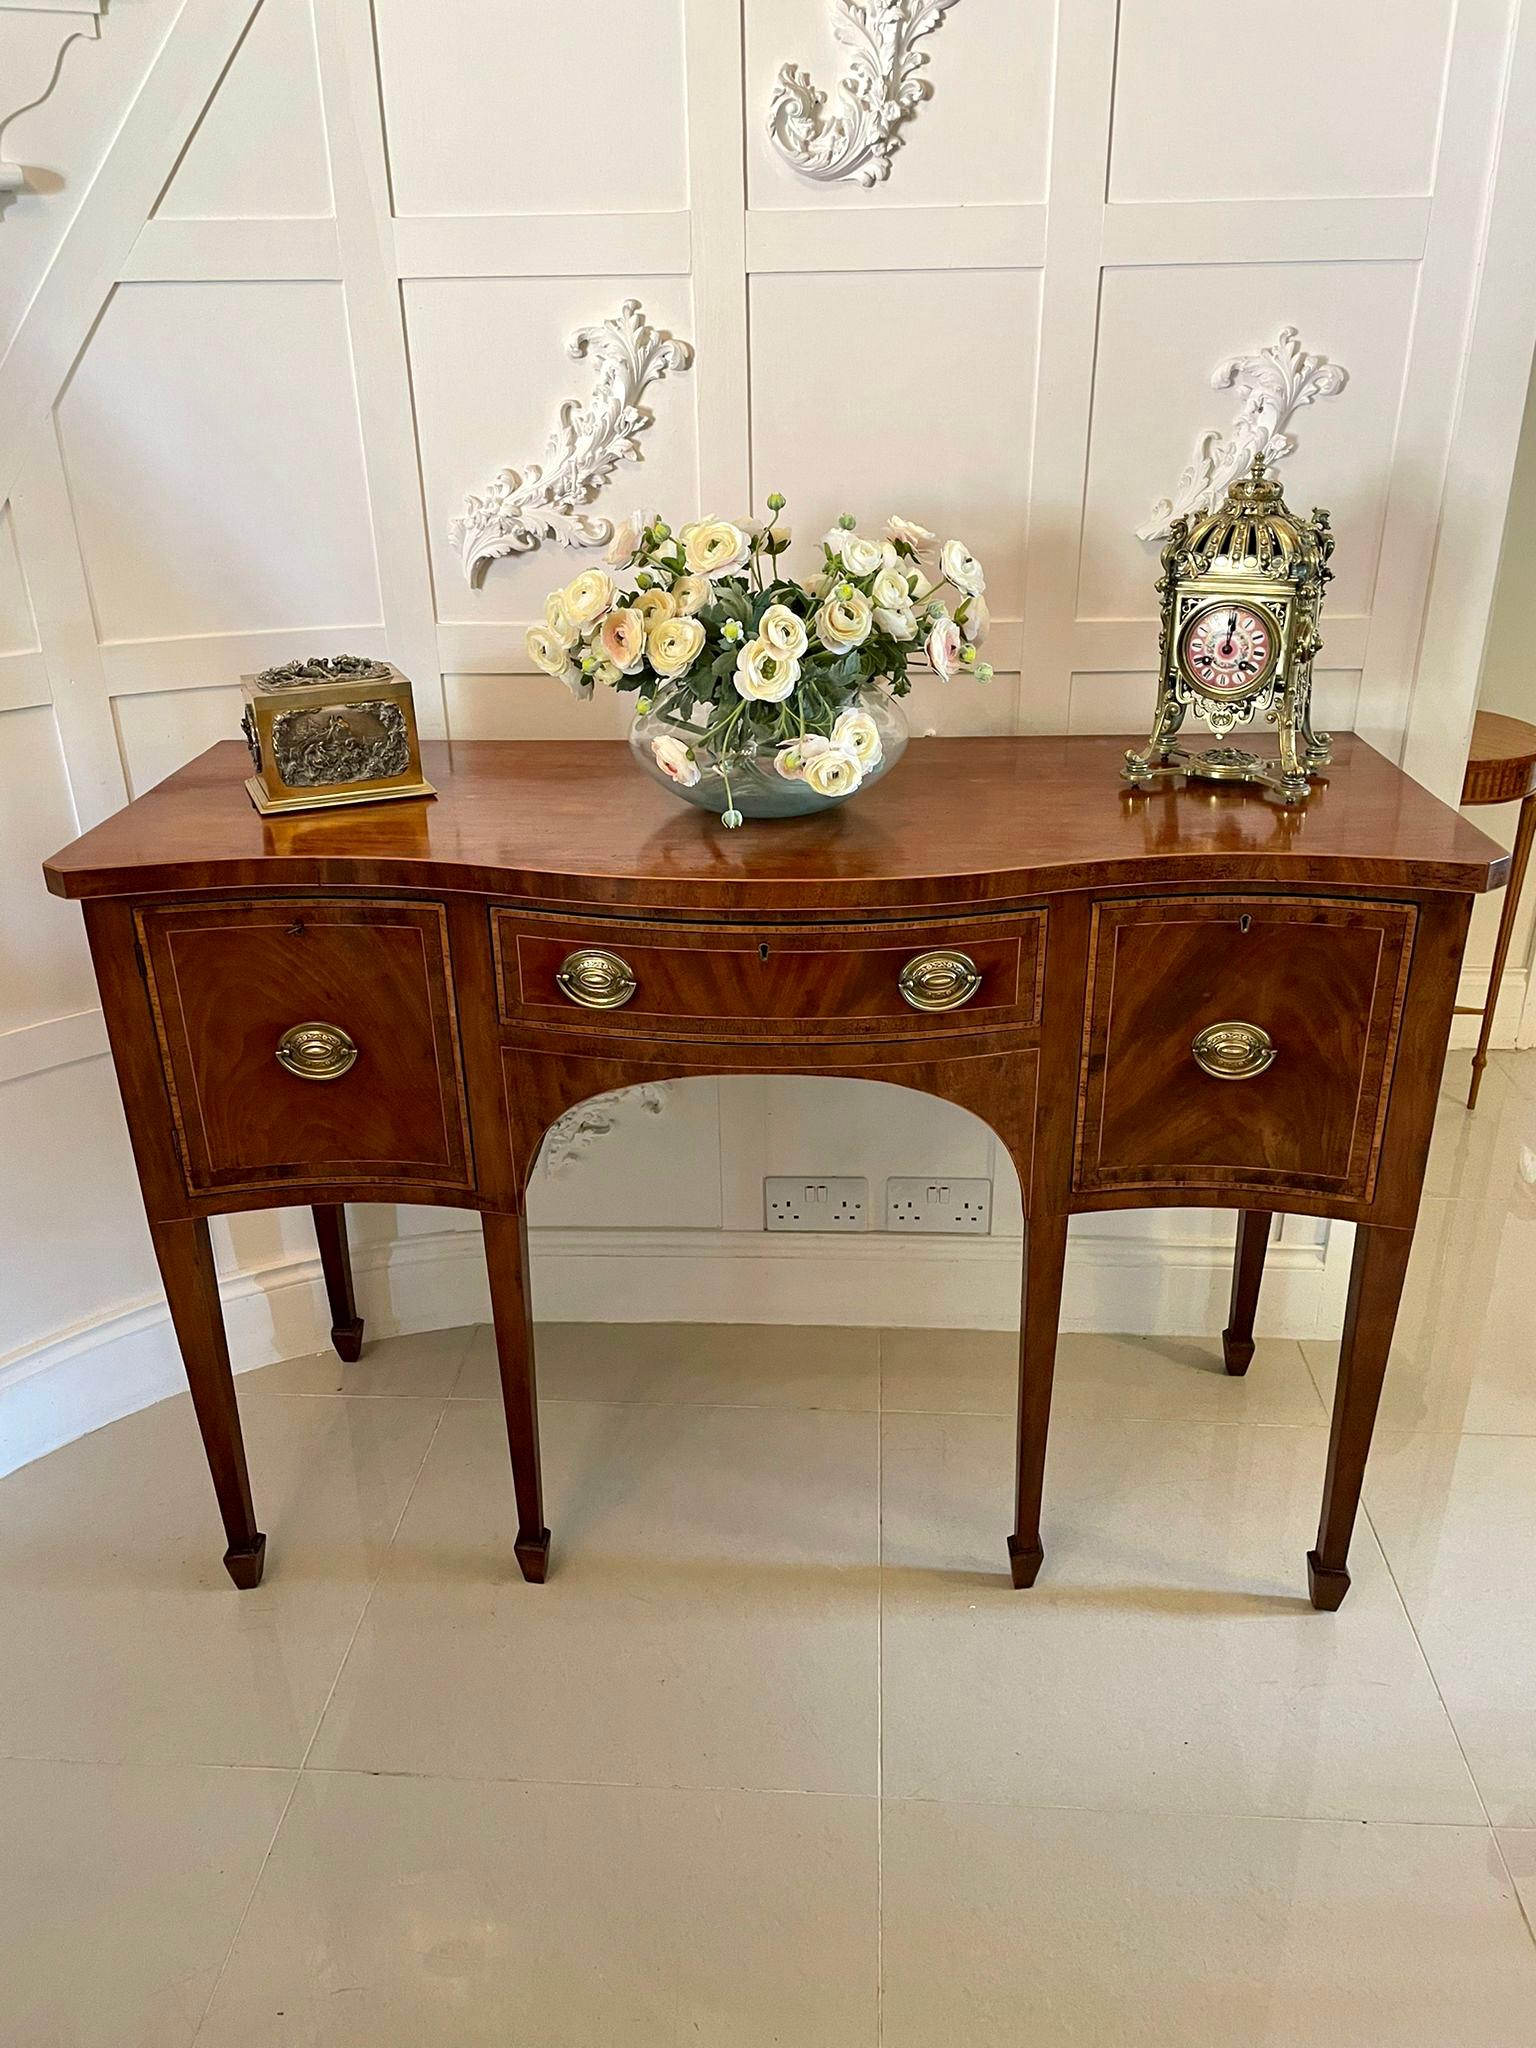 Date 1870 Quality antique 19th century mahogany serpentine fronted sideboard having a quality mahogany serpentine fronted shaped top with satinwood inlay stringing, shaped central drawer crossbanded in satinwood with original oval brass handles